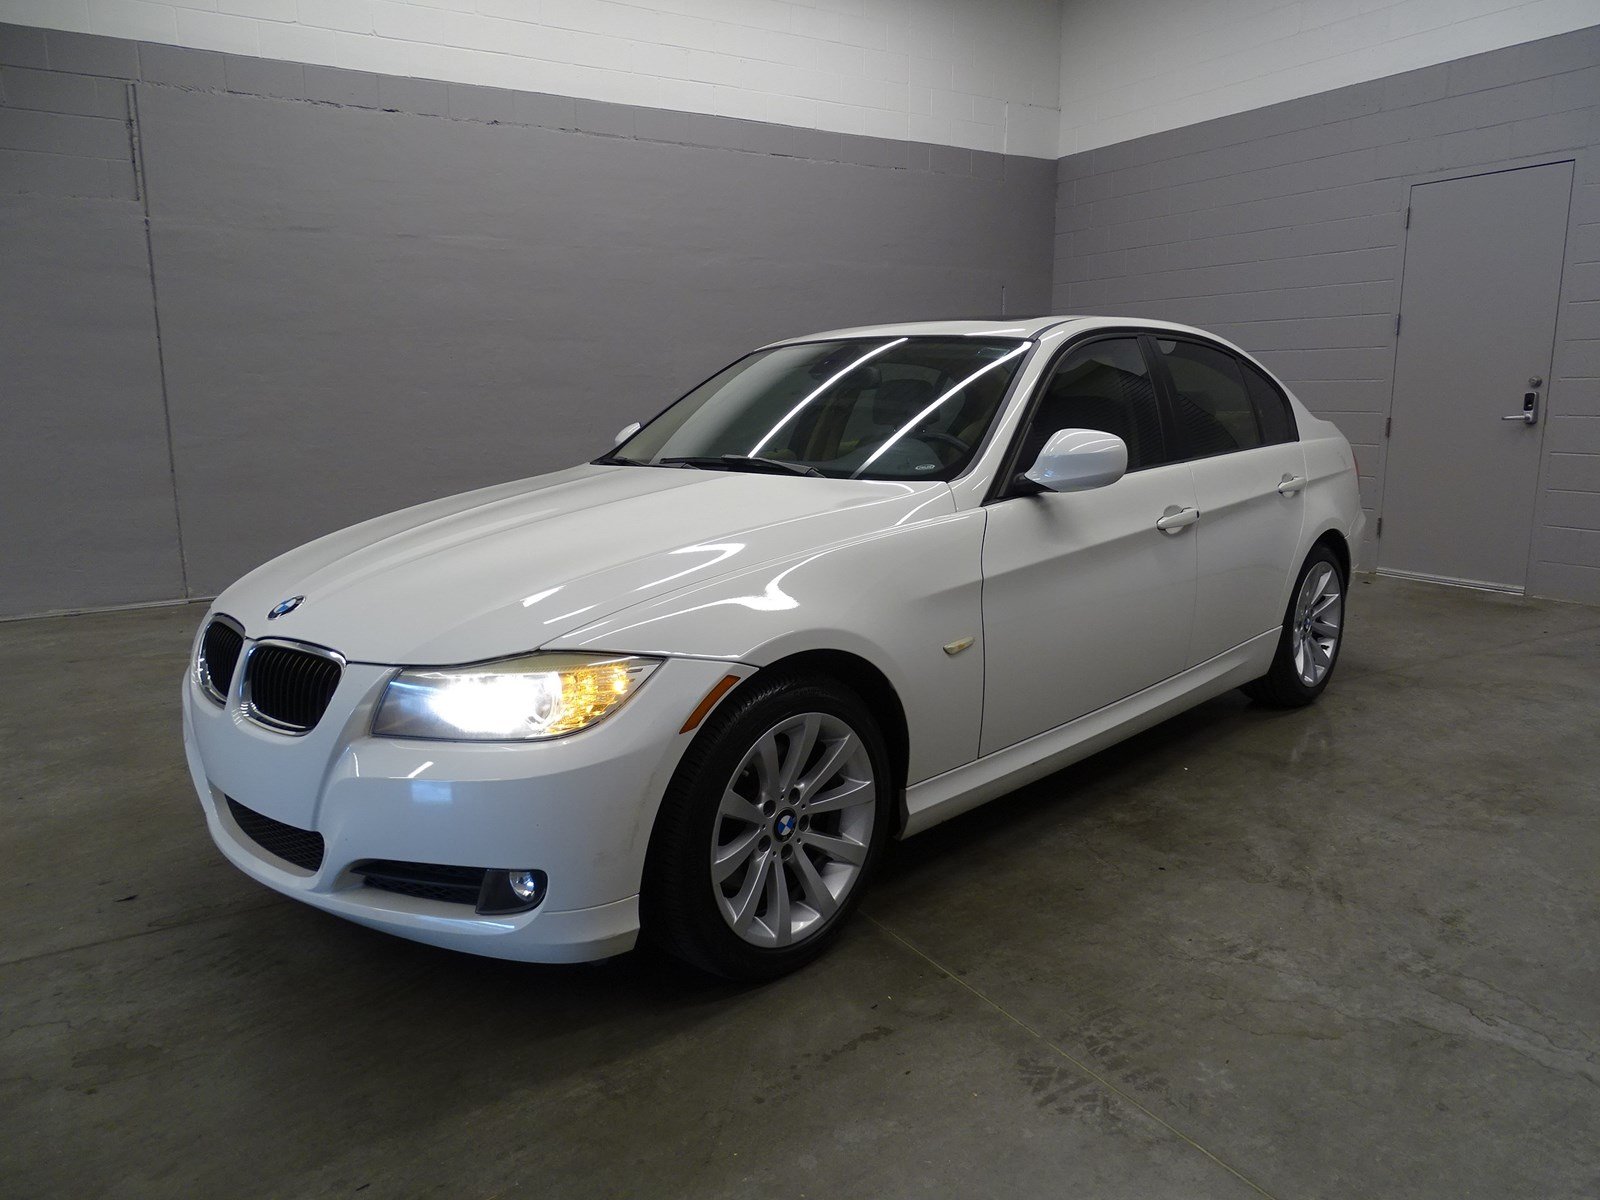 PreOwned 2011 BMW 3 Series 328i 4dr Car in Union City 